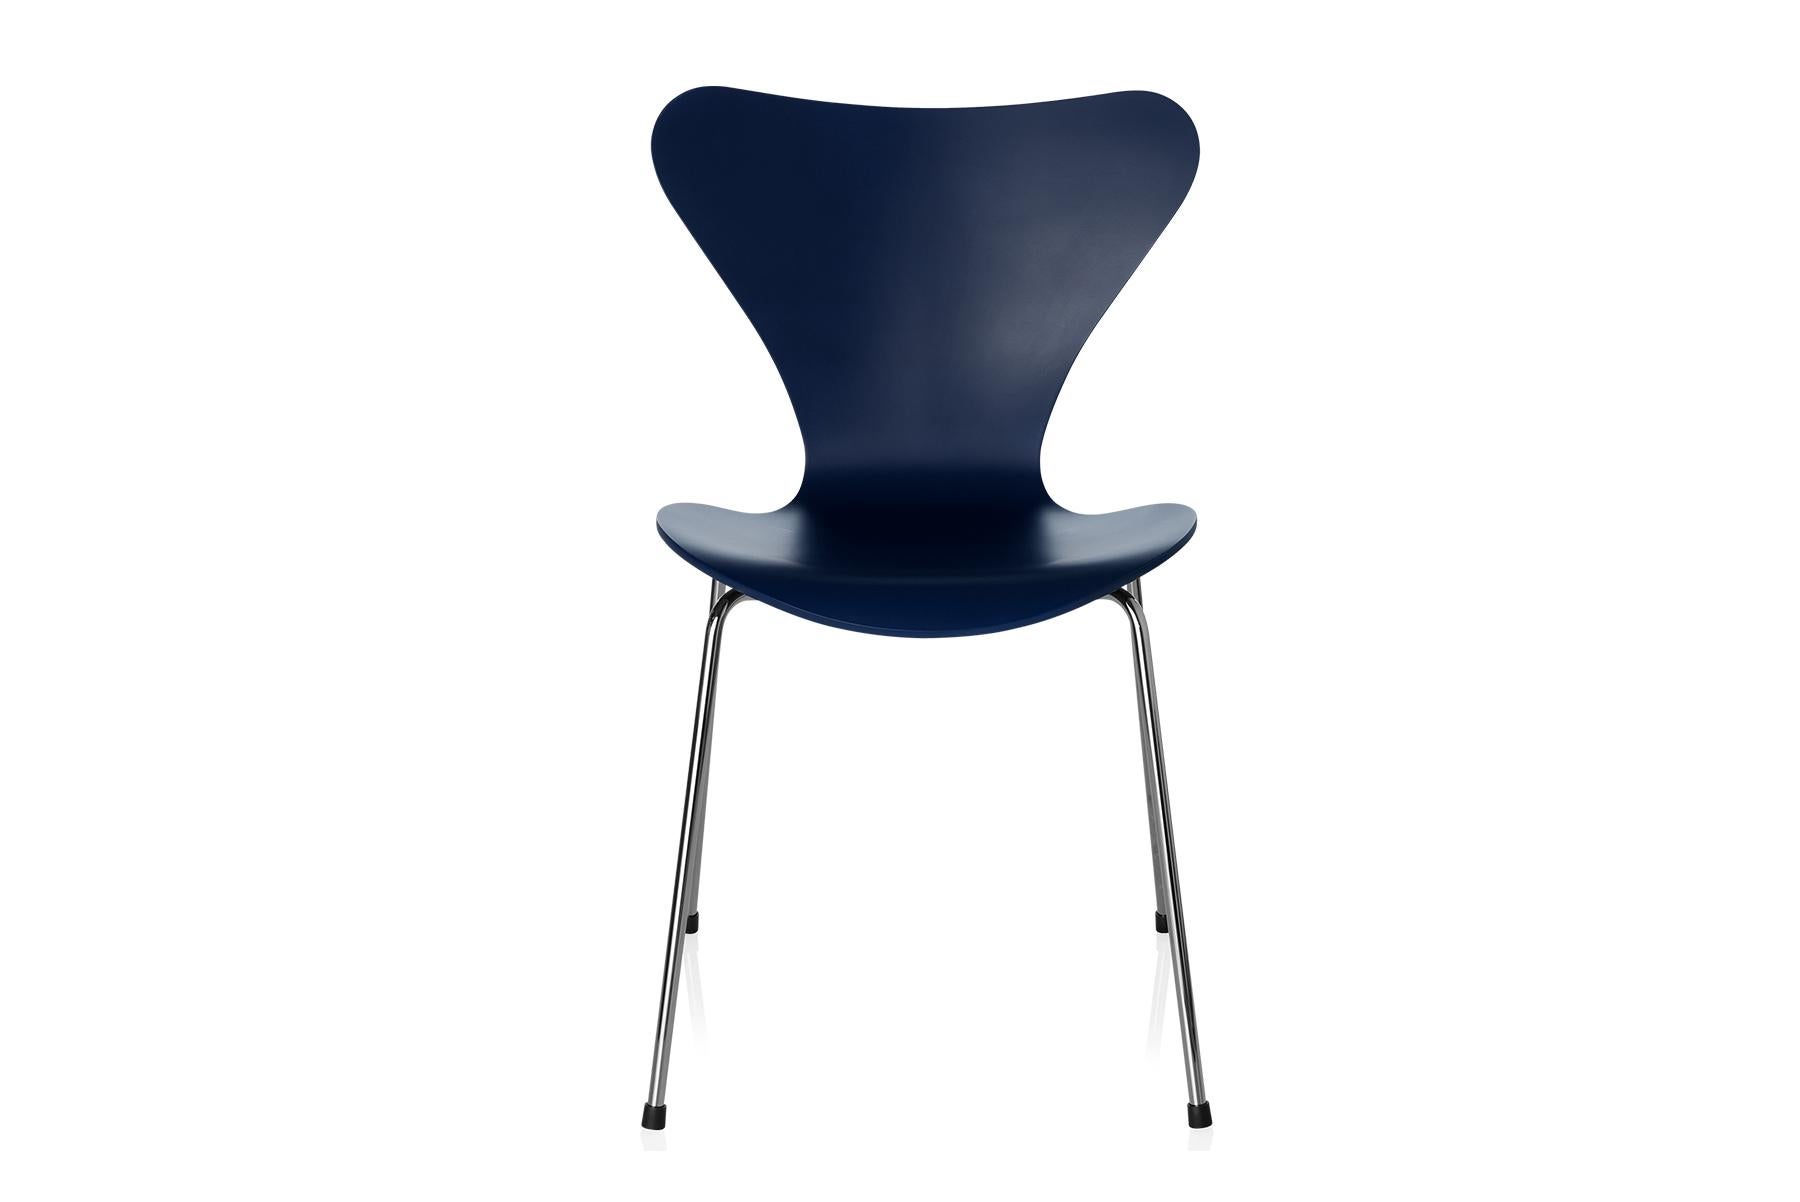 The four-legged stackable chair represents the culmination of the lamination technique. The visionary Arne Jacobsen exploited the possibilities of lamination to perfection resulting in the iconic shape of the chair. Series 7™ represents the chair in